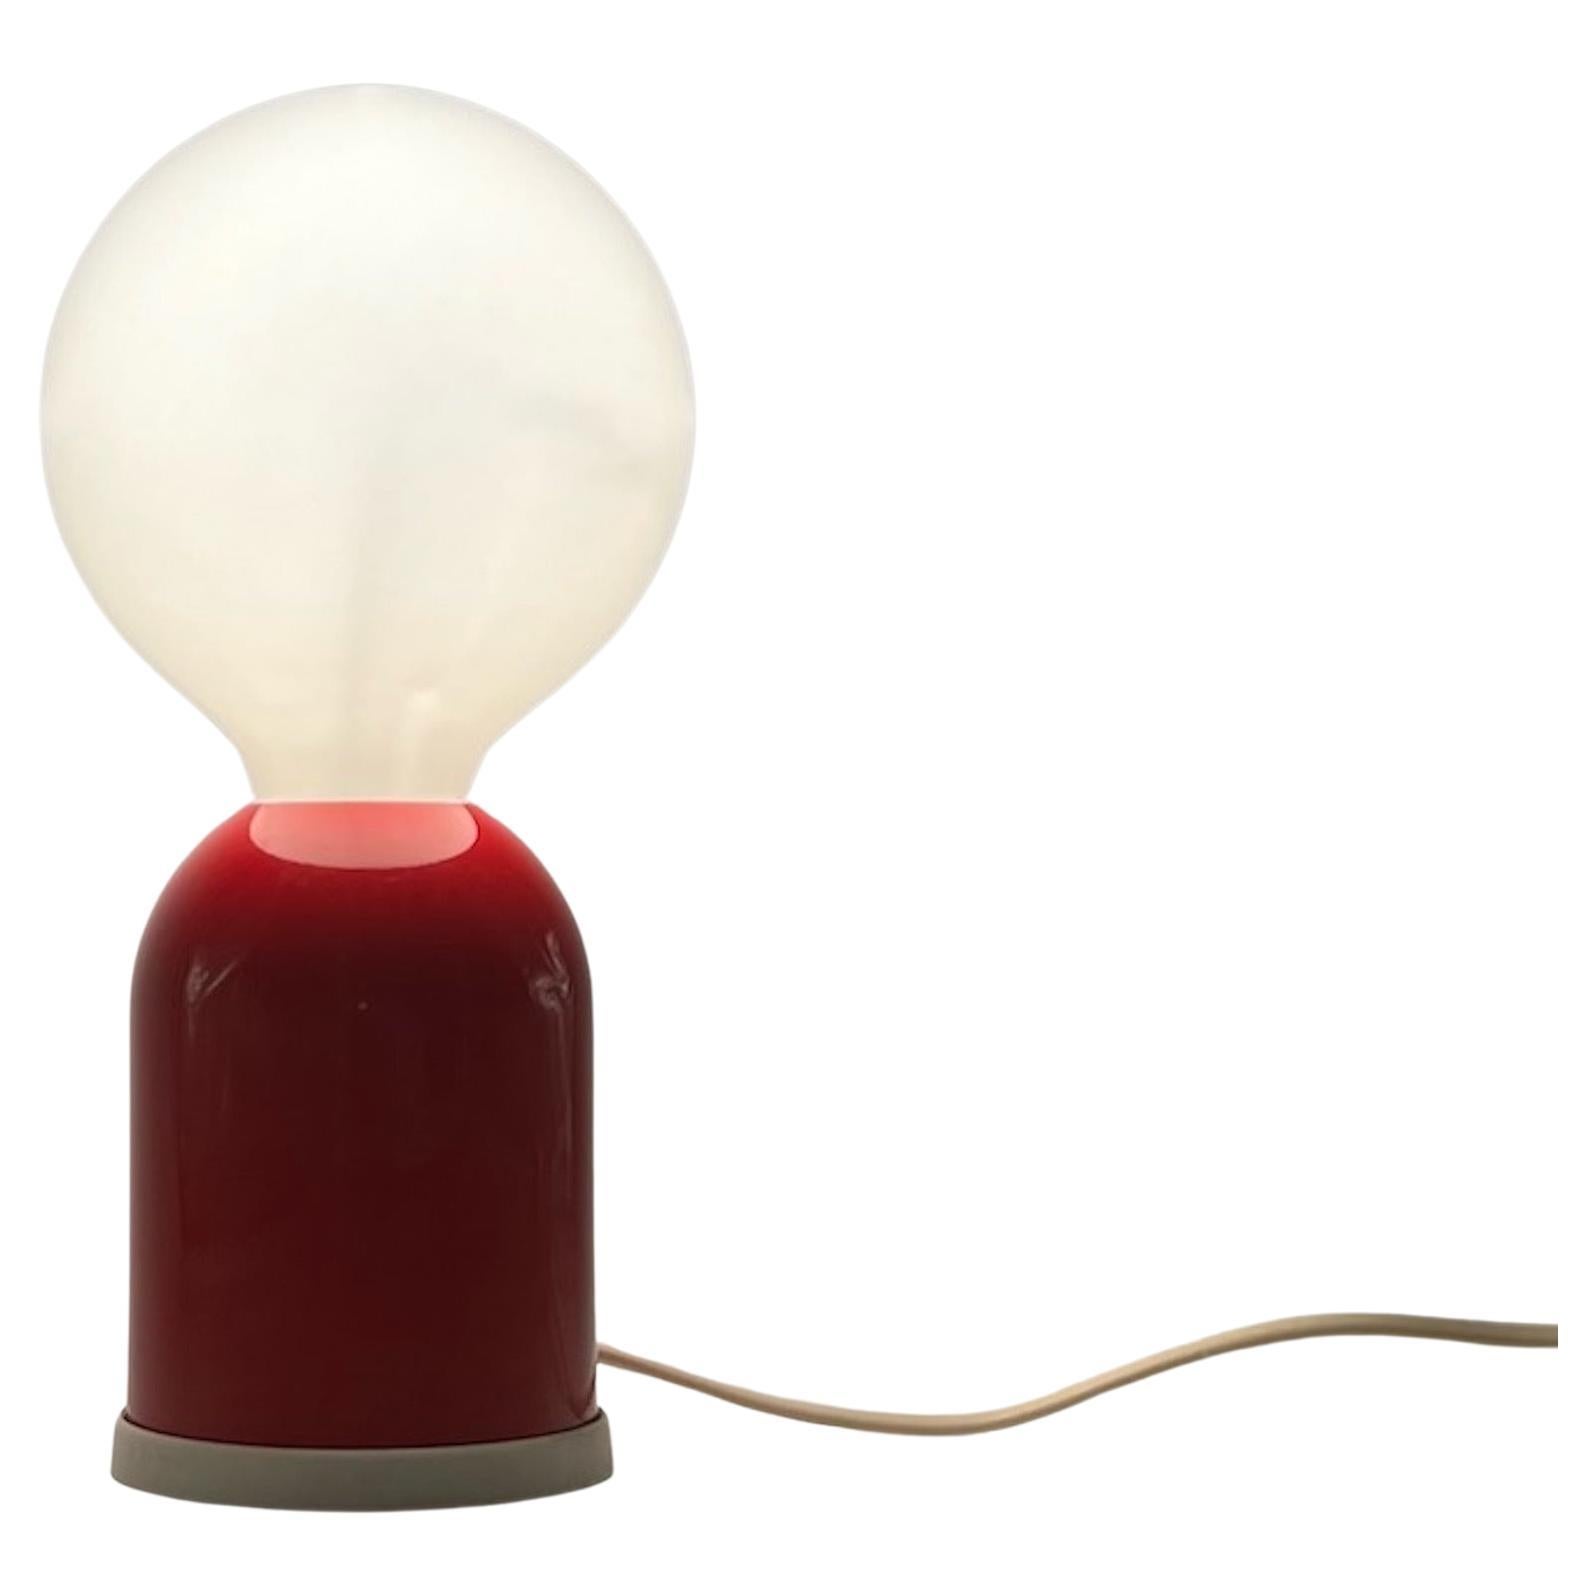 Minimalistic Table Lamp in Lacquered Red Metal by Targetti Sankey, 1980s For Sale